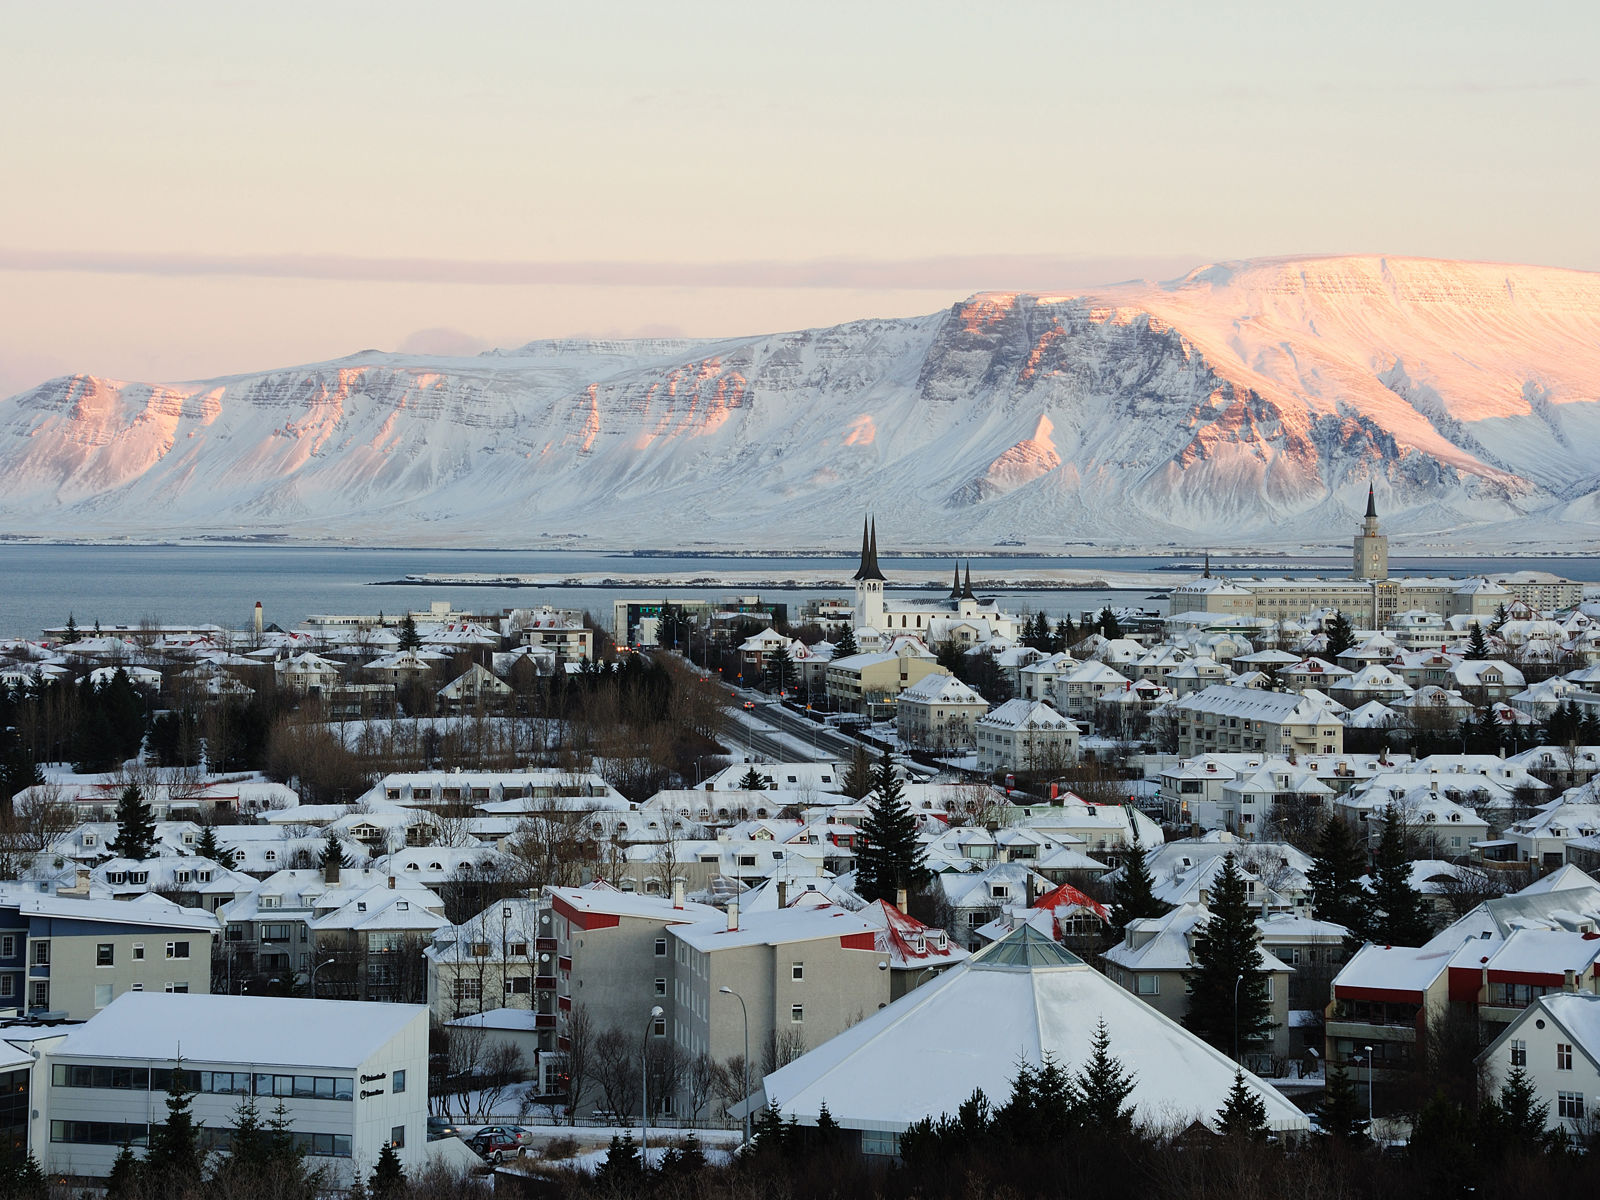 View of Reykjavik city with mountains in the background during a sunset